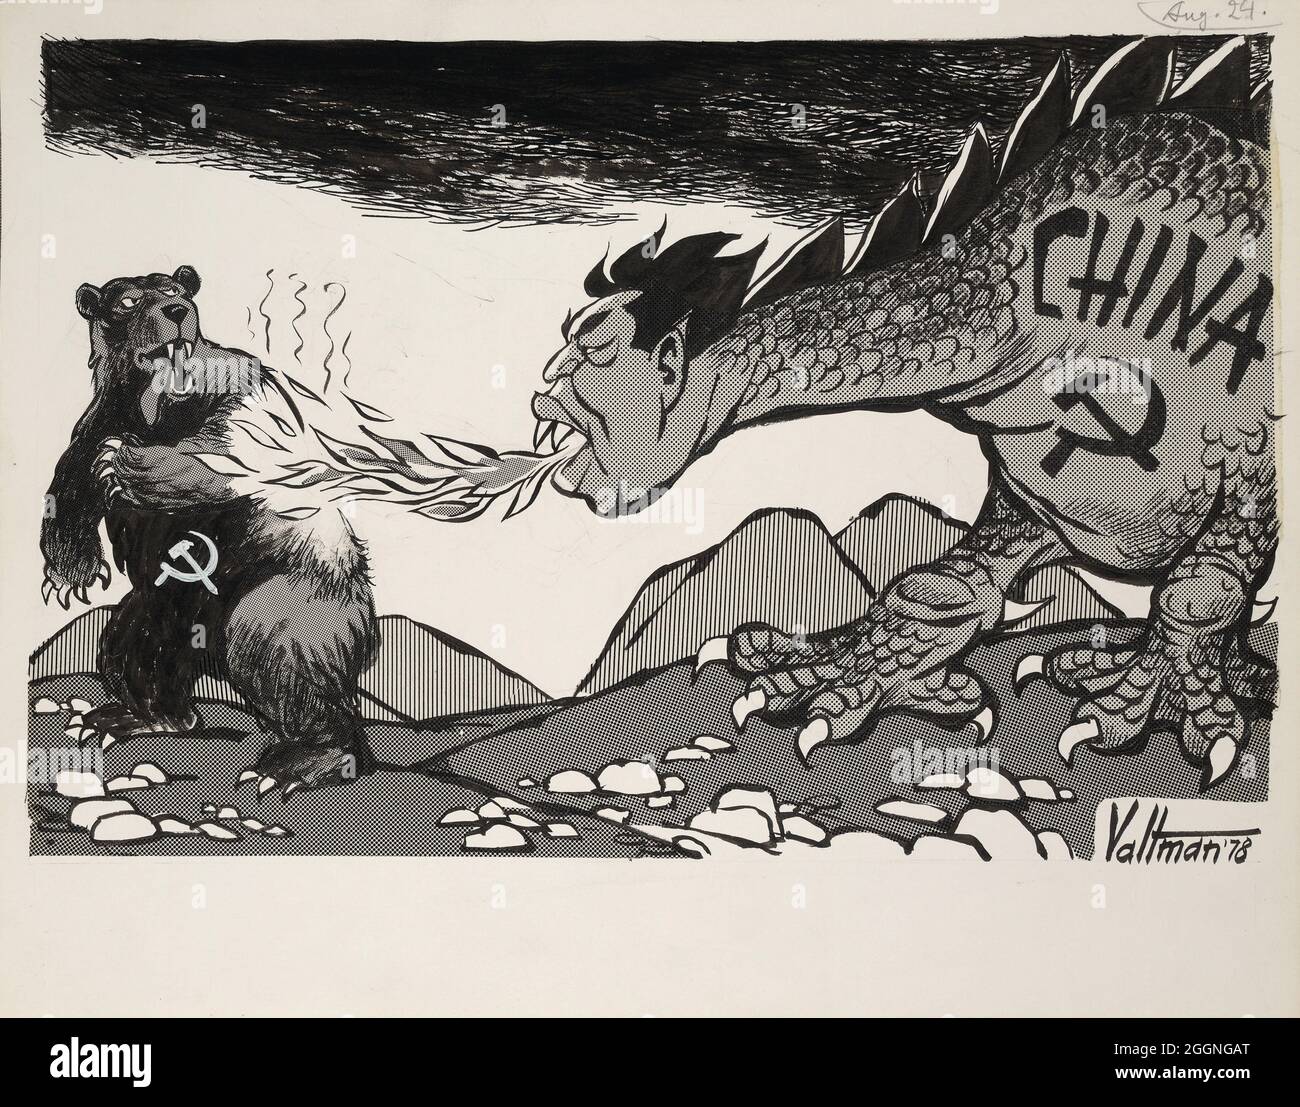 Chinese dragon and Soviet bear. Museum: PRIVATE COLLECTION. Author: Edmund S. Valtman. Stock Photo